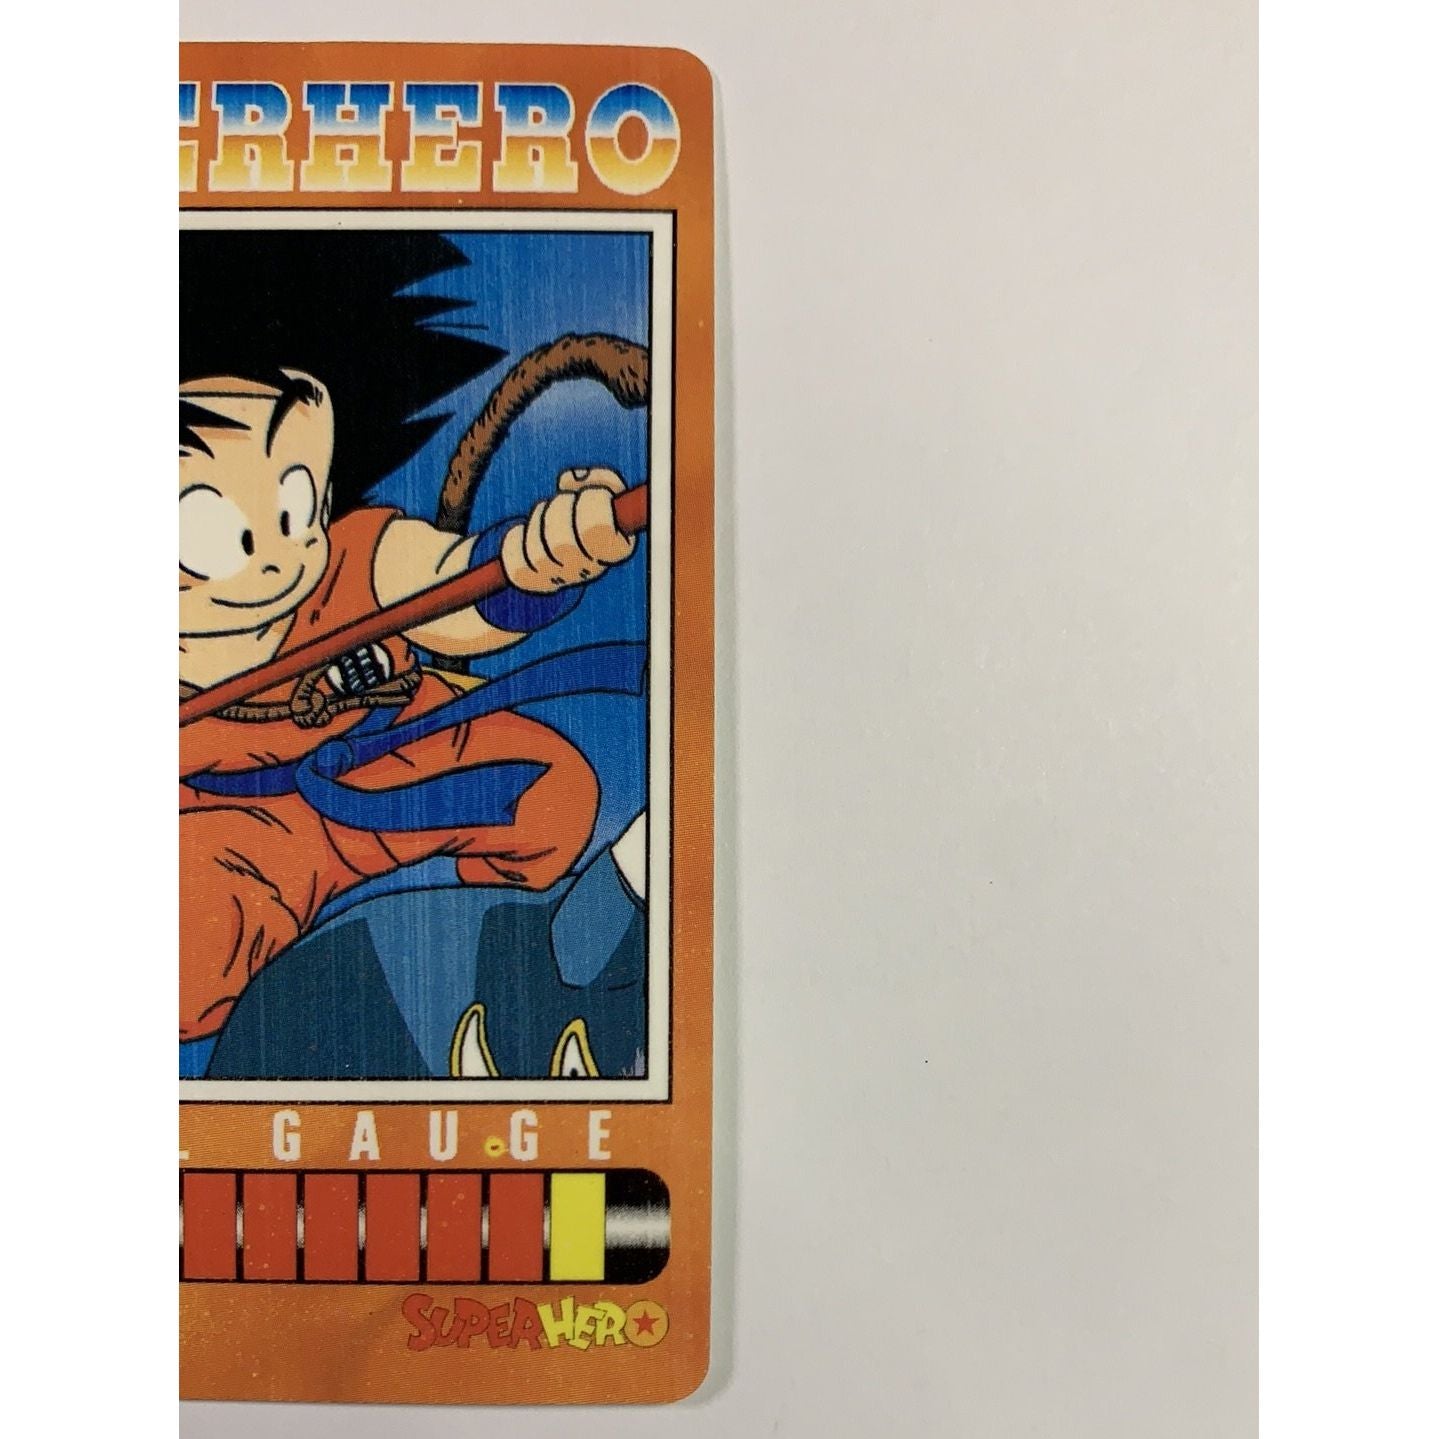  1995 Cardass Adali Super Hero Special Card S-96 Silver Foil Air Force Goku  Local Legends Cards & Collectibles